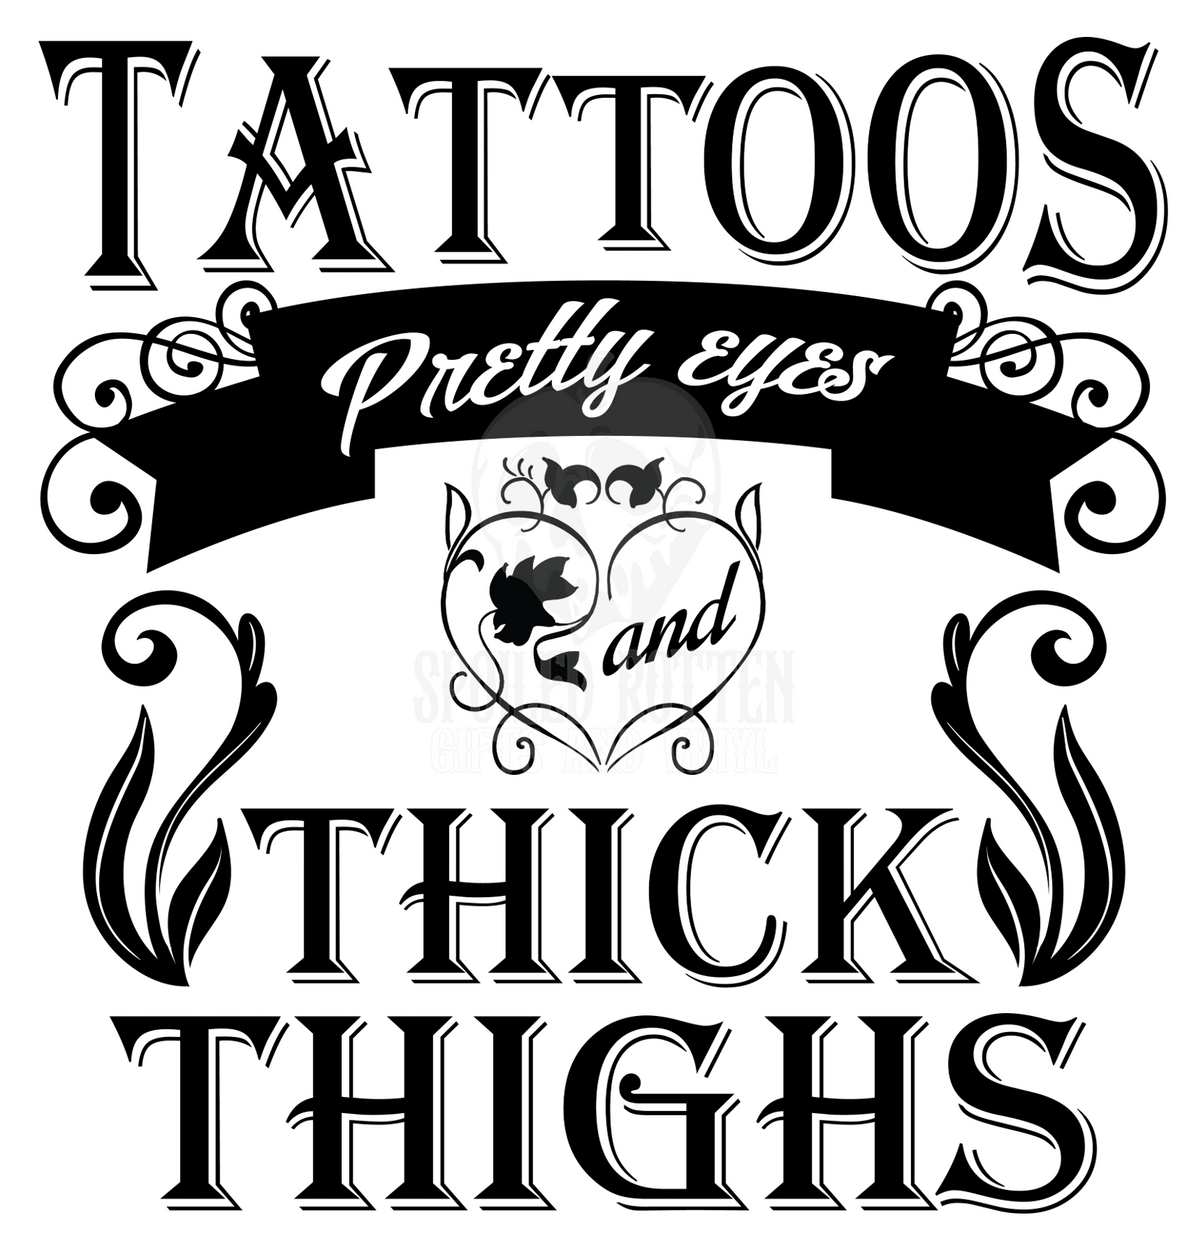 Tattoos, Pretty Eyes and Thick Thighs vinyl sticker